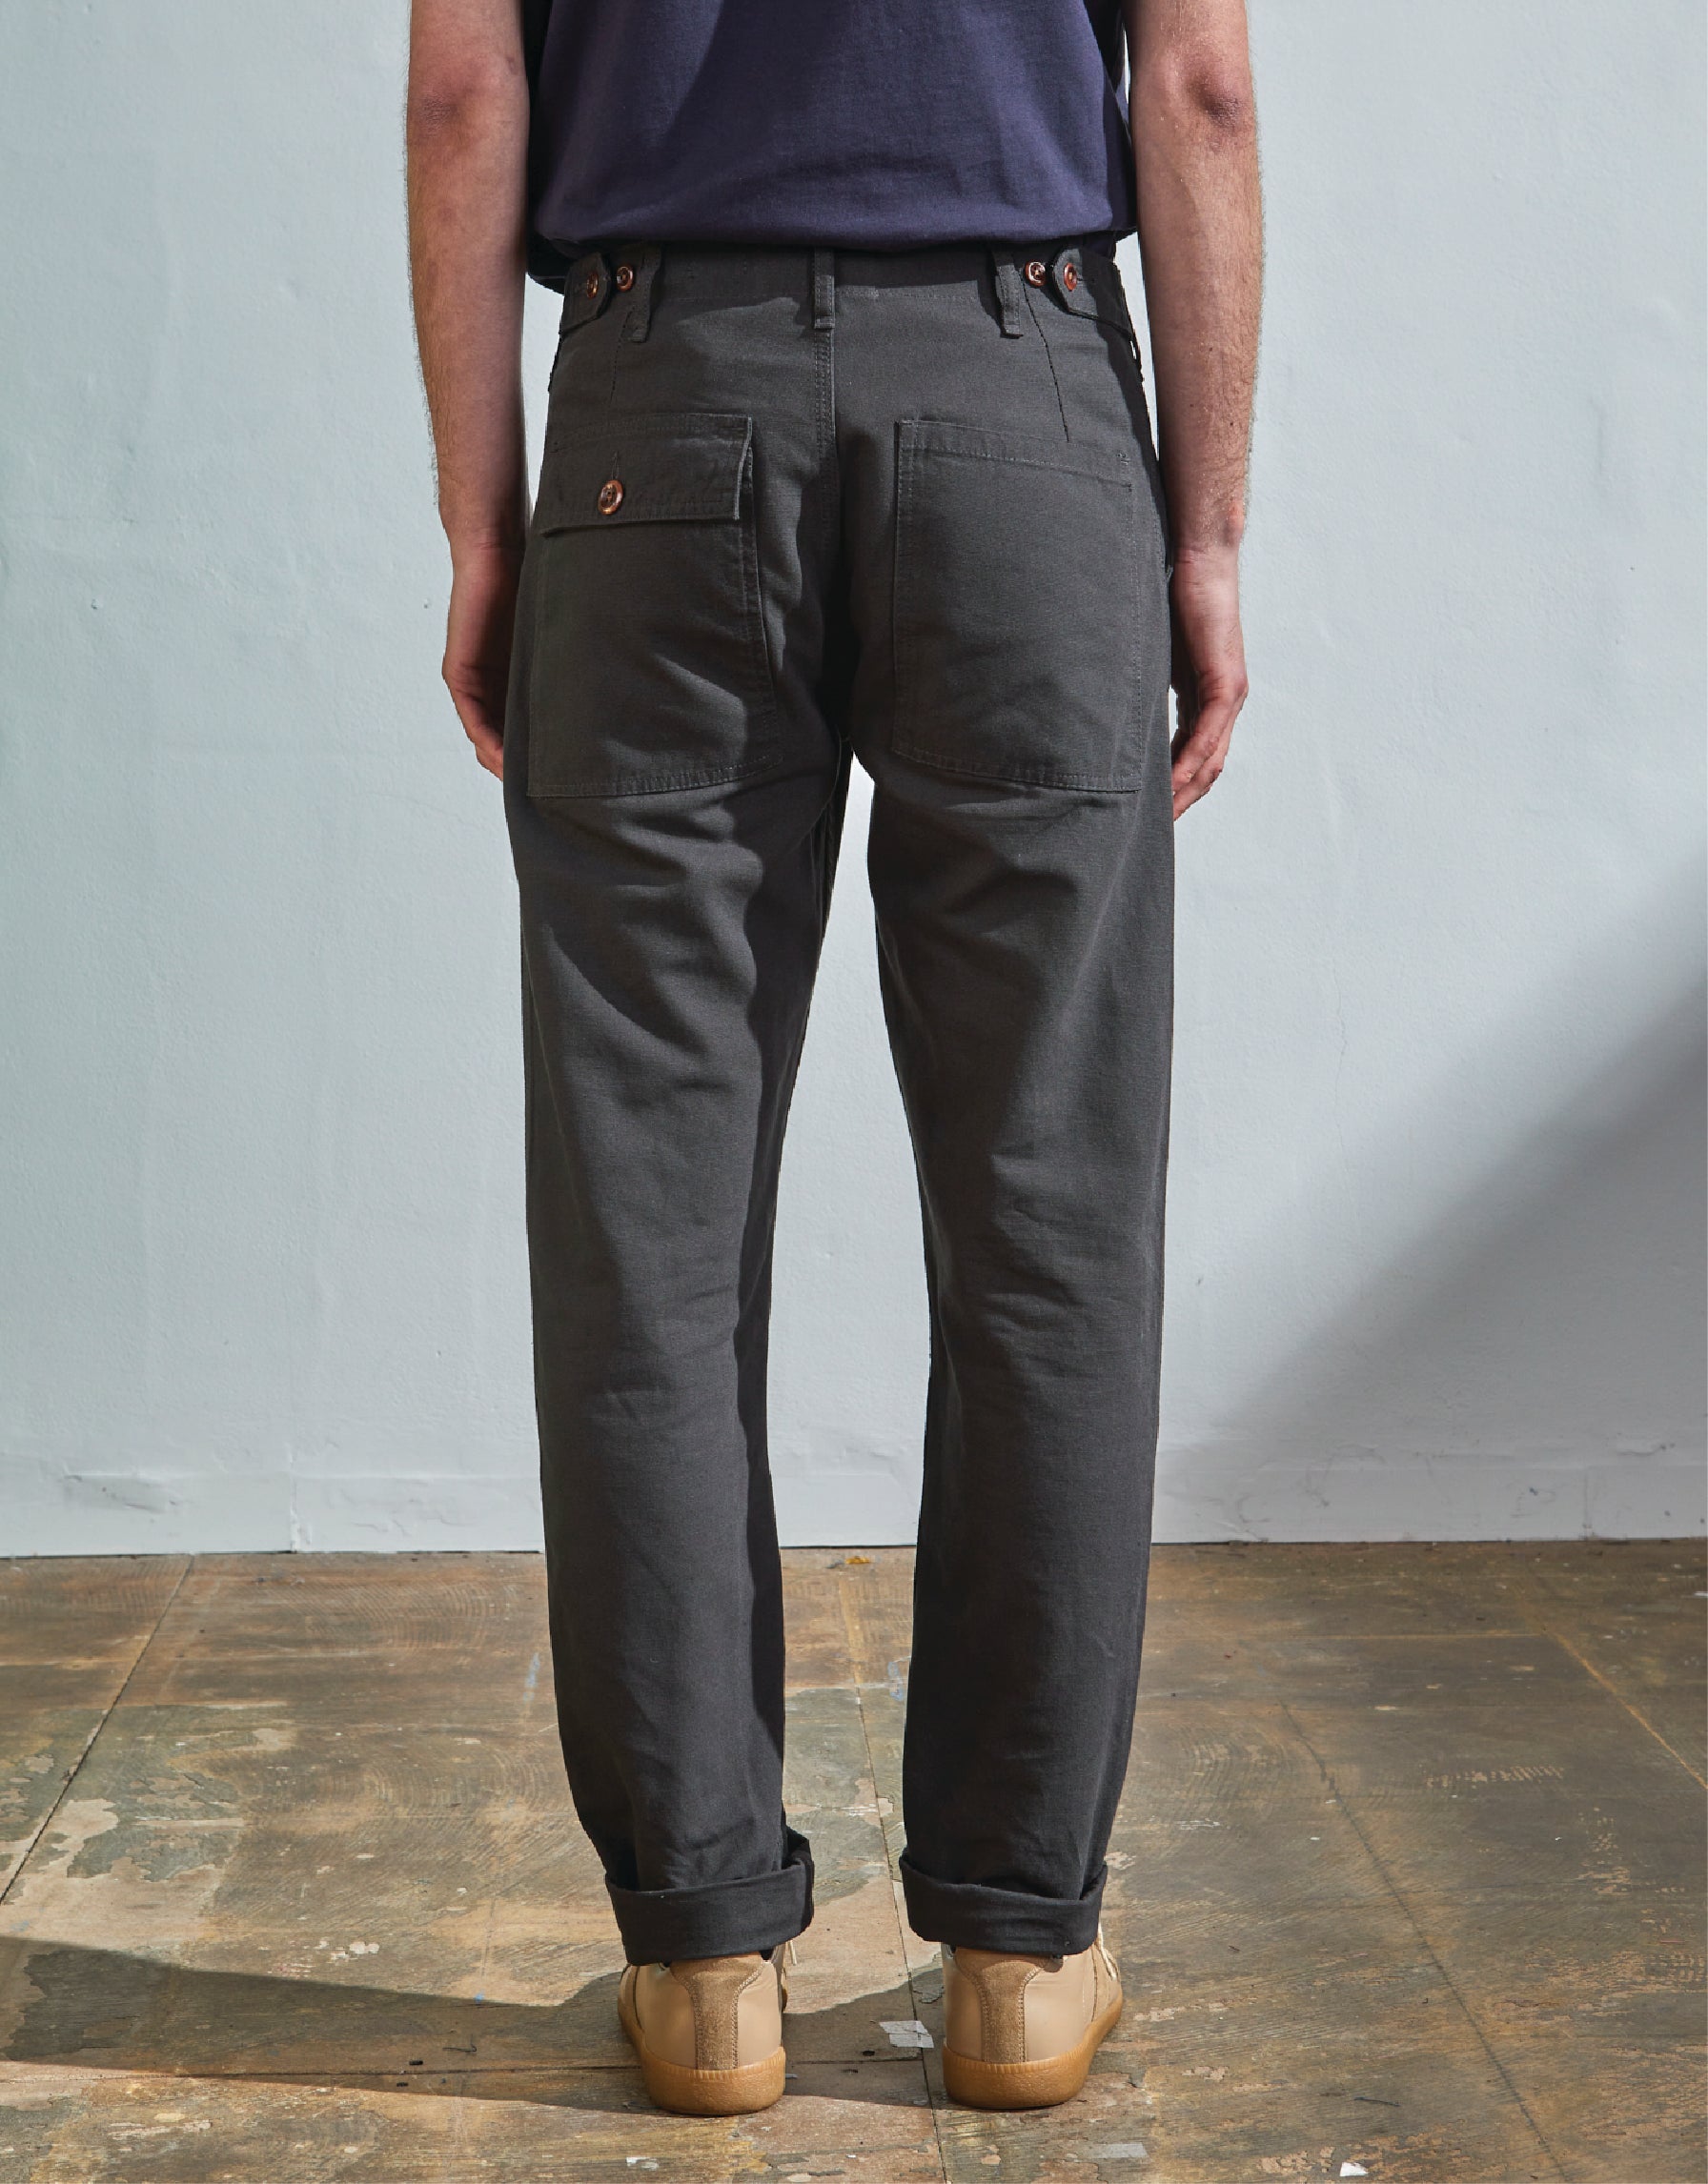 Uskees  Trouser Fit Guide